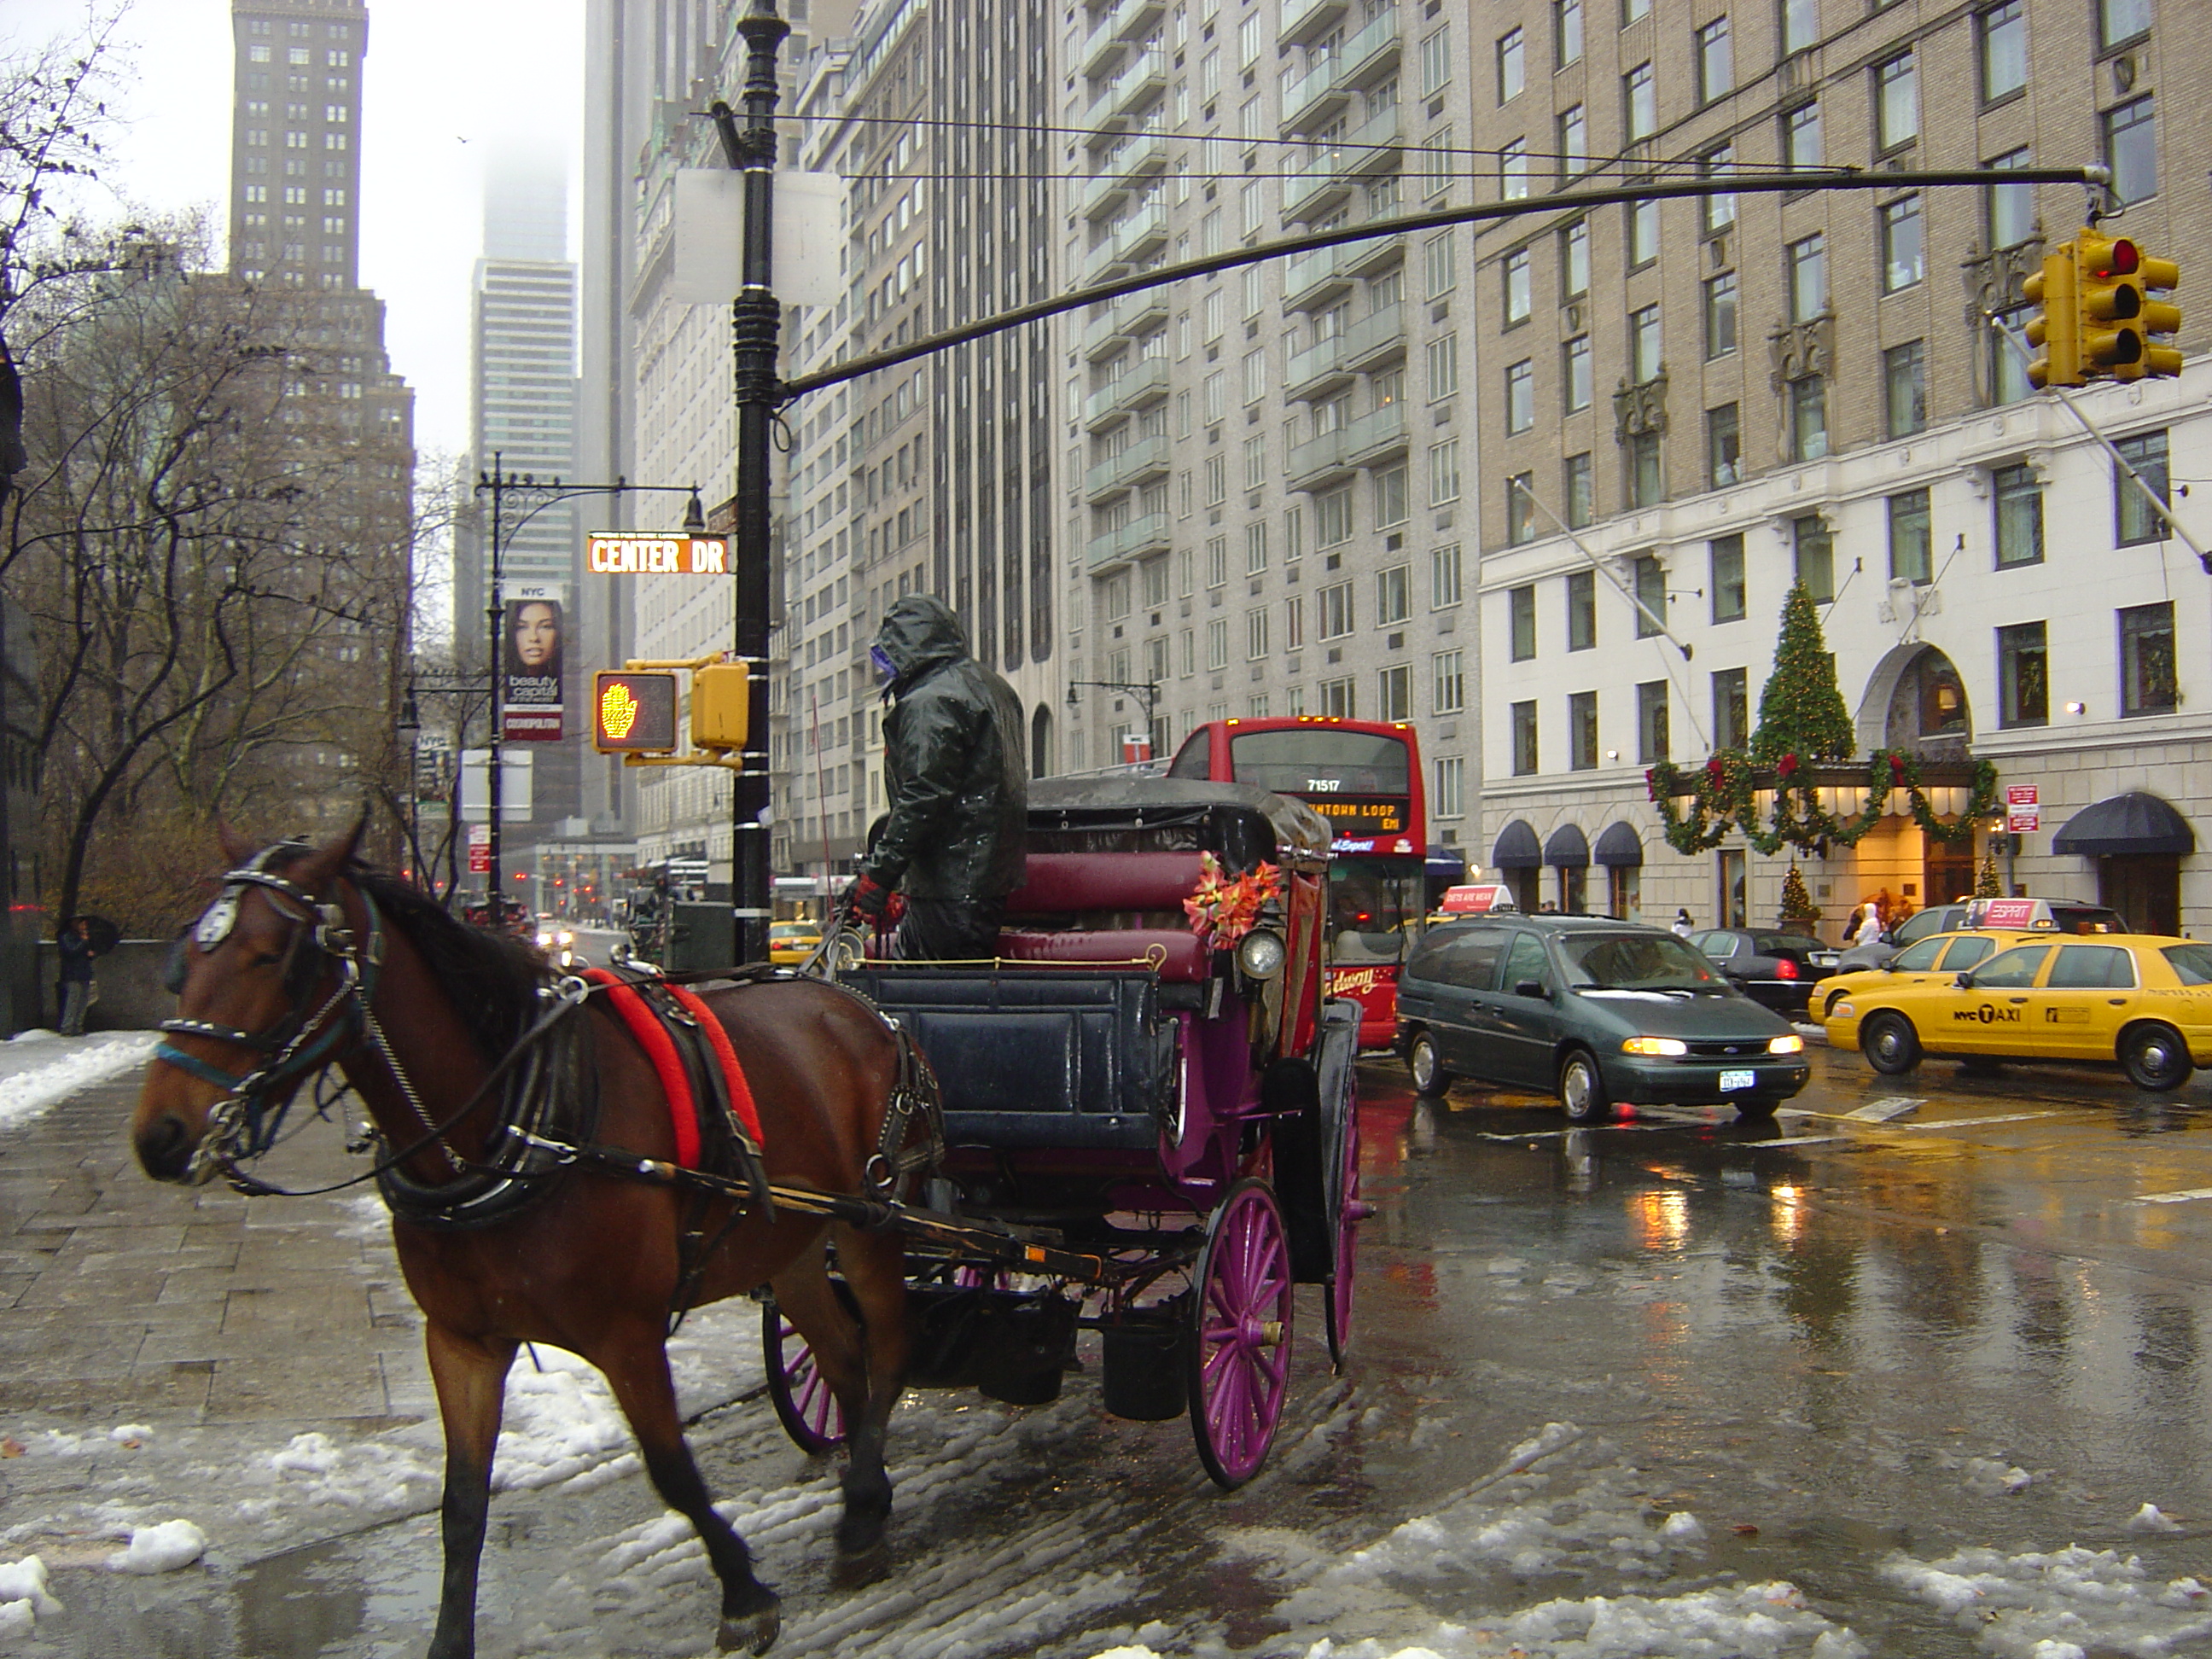 Horse drawn carriage on wet streets